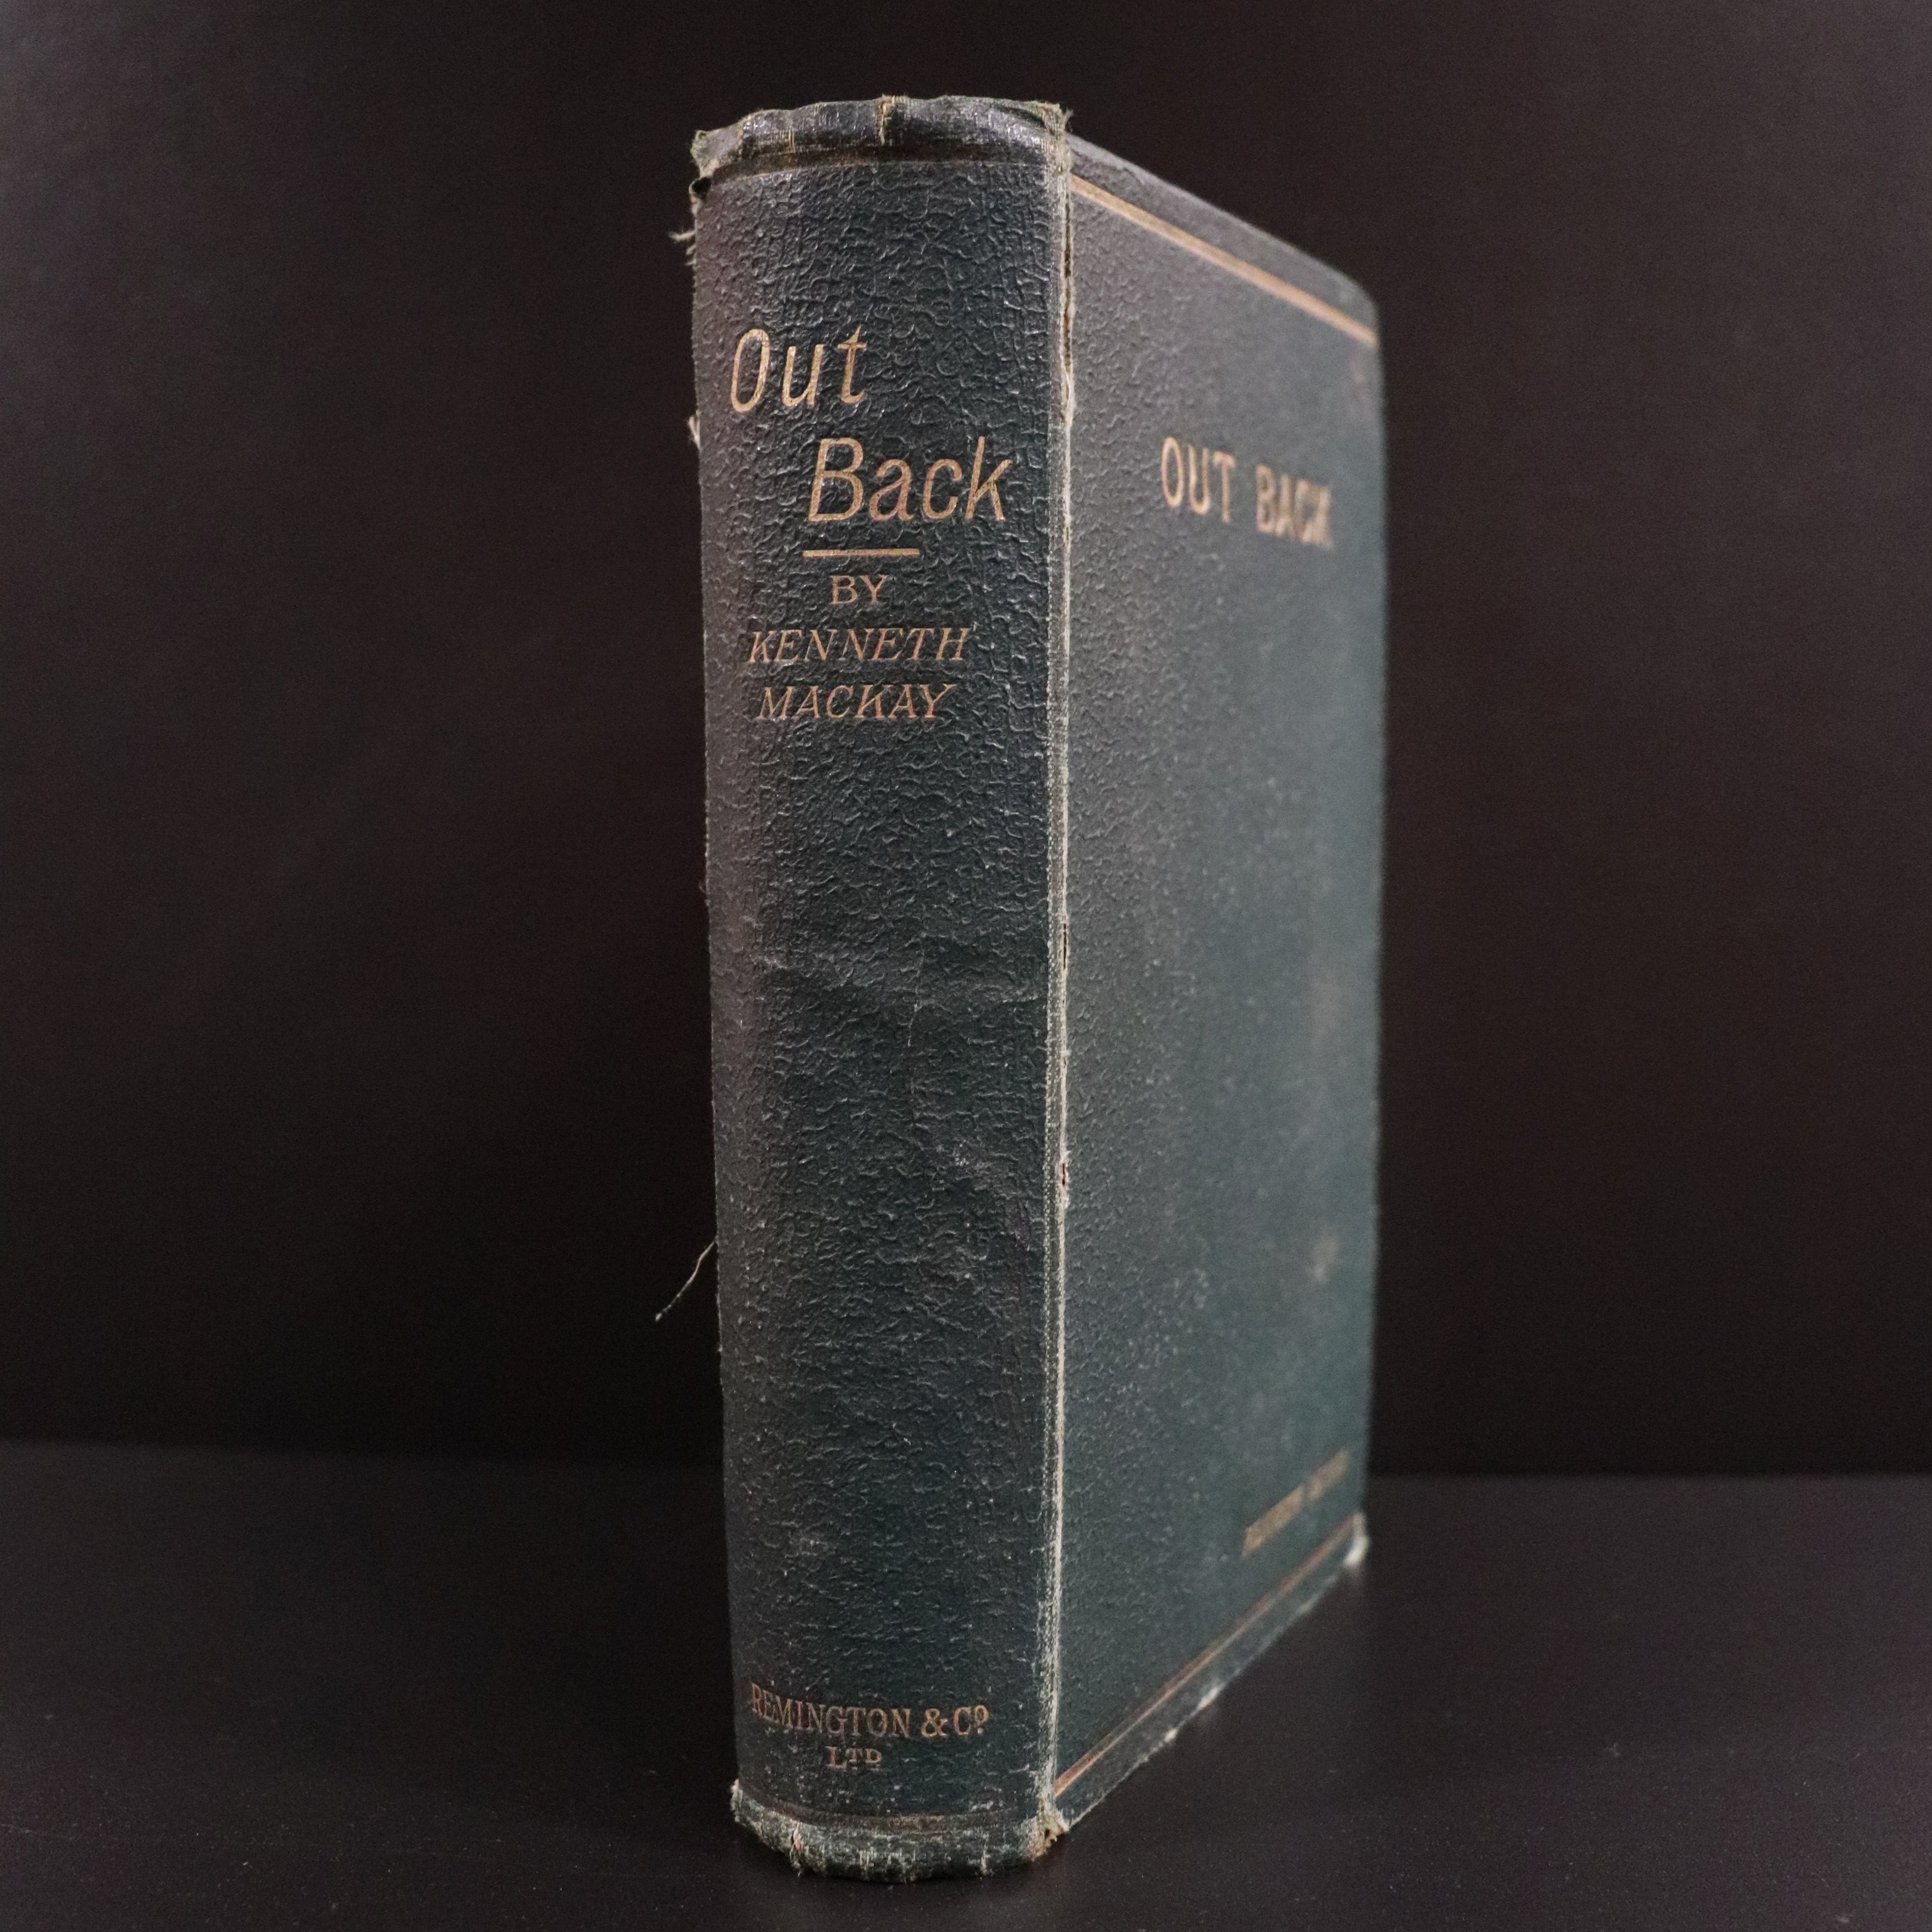 1893 Out Back by Kenneth MacKay 1st Edition Rare Australian Fiction Book